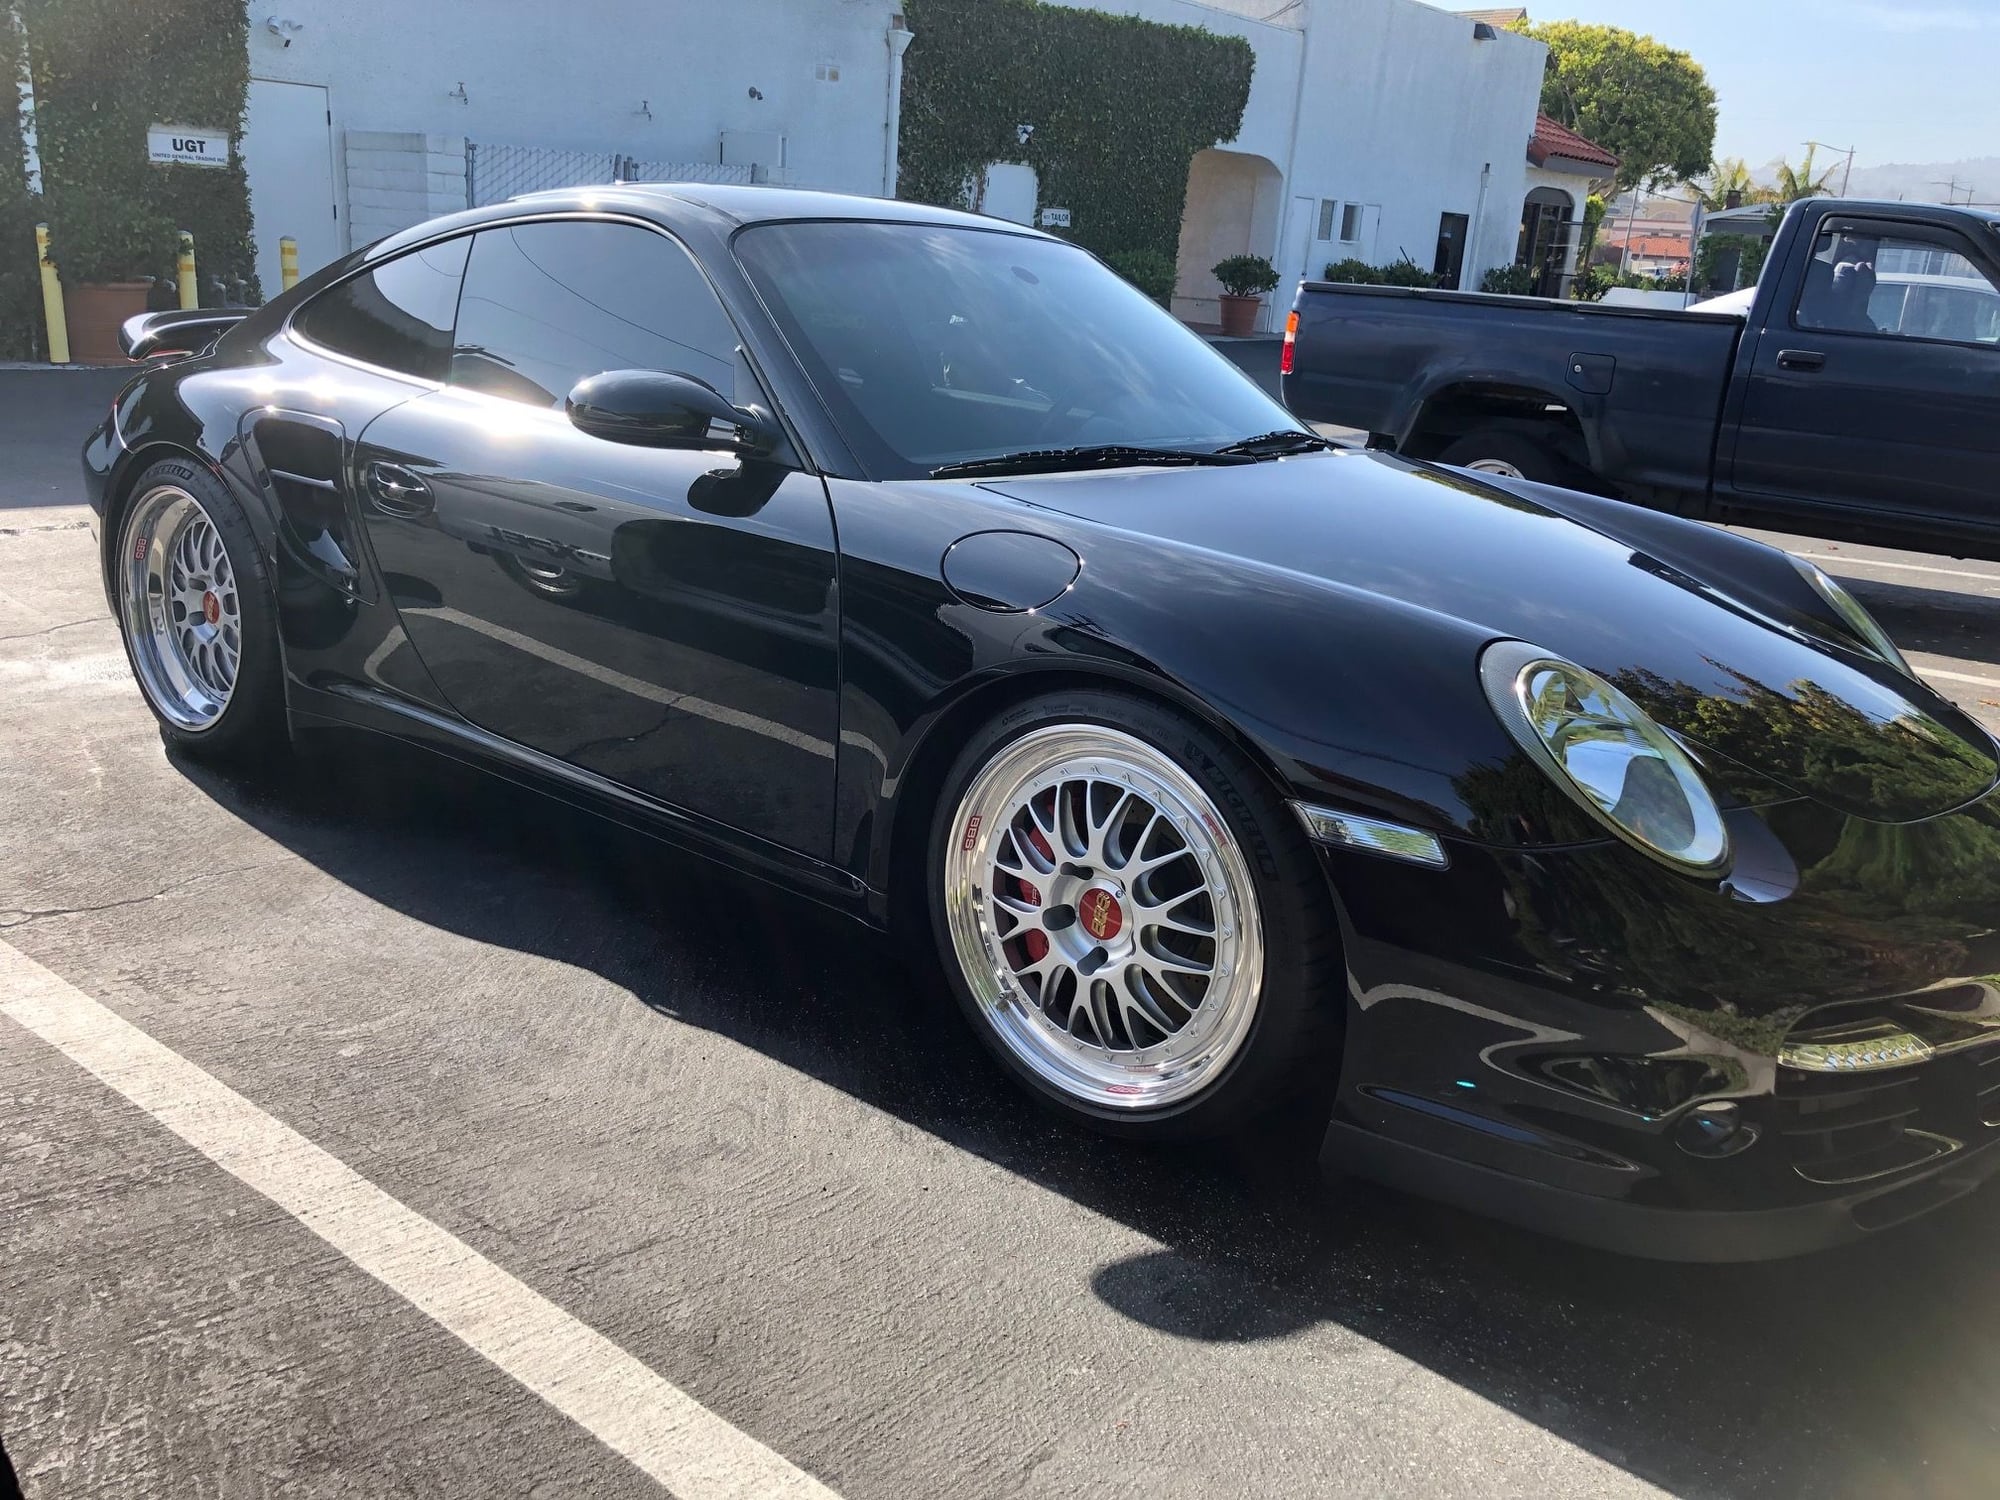 2009 Porsche 911 - 2009 911 Turbo Coupe 6spd Blk/Blk w/ light mods - Used - VIN WP0AD29909S766267 - 80,020 Miles - 6 cyl - AWD - Manual - Coupe - Black - Torrance, CA 90505, United States